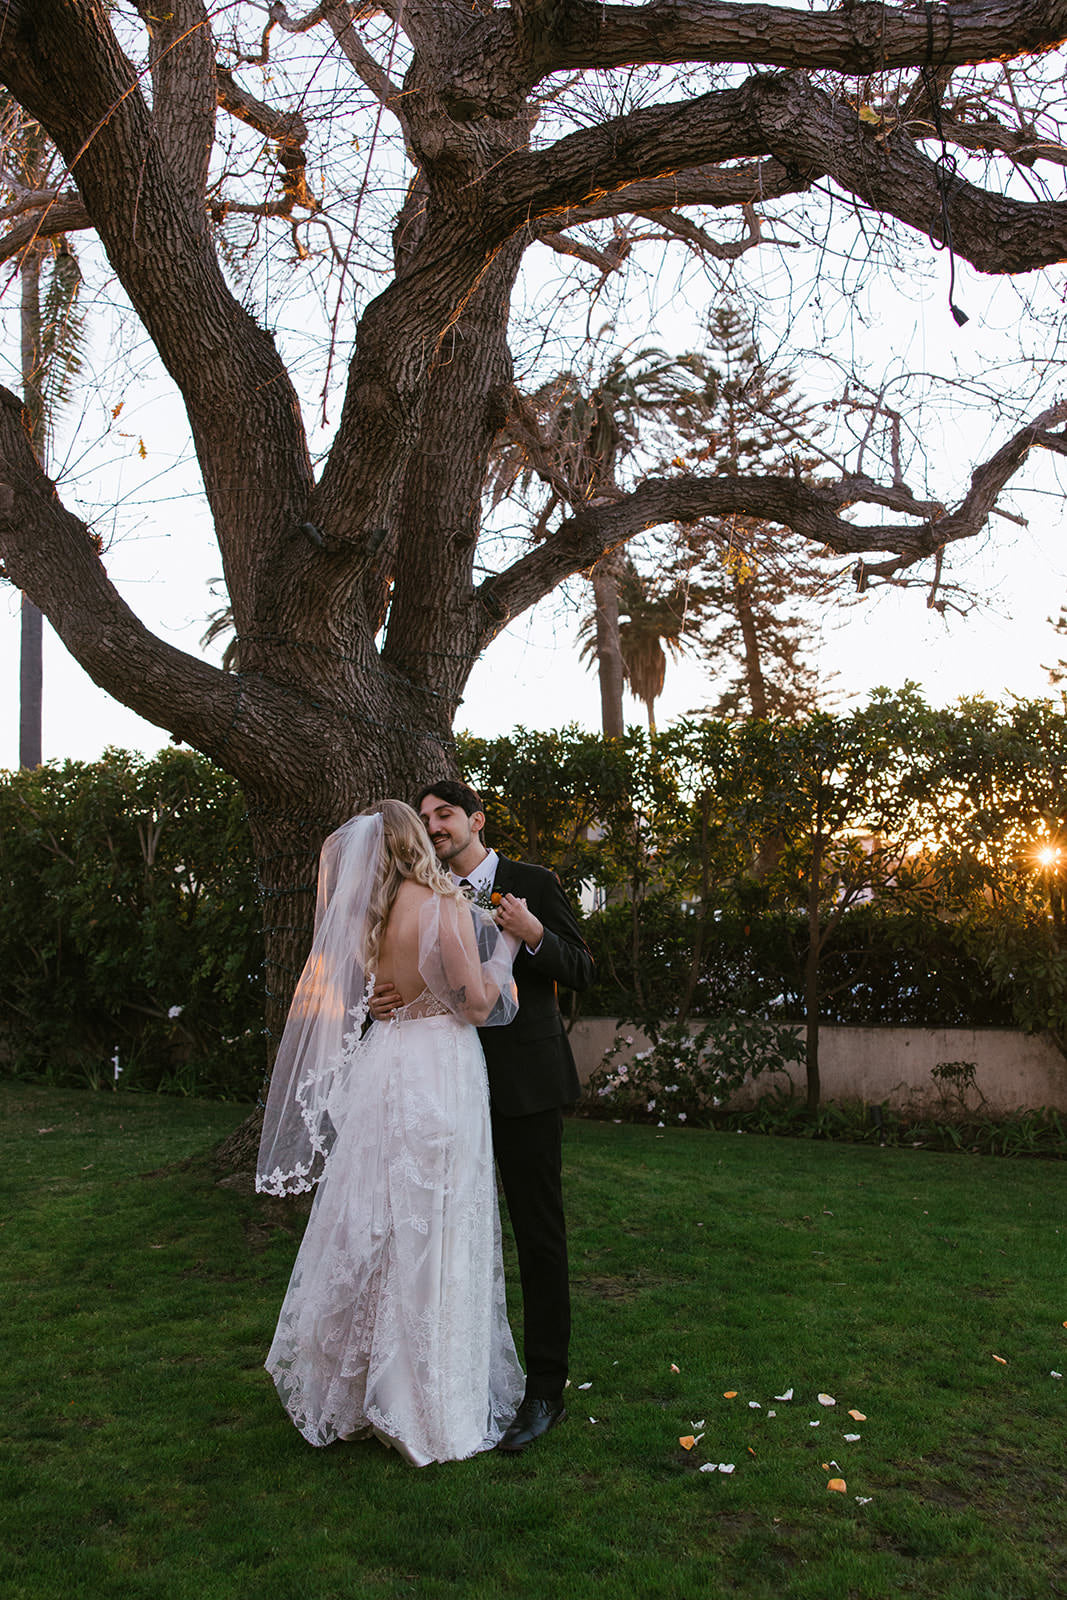 fingertip length vine and leaf lace wedding veil on bride for Southern California ethereal wedding